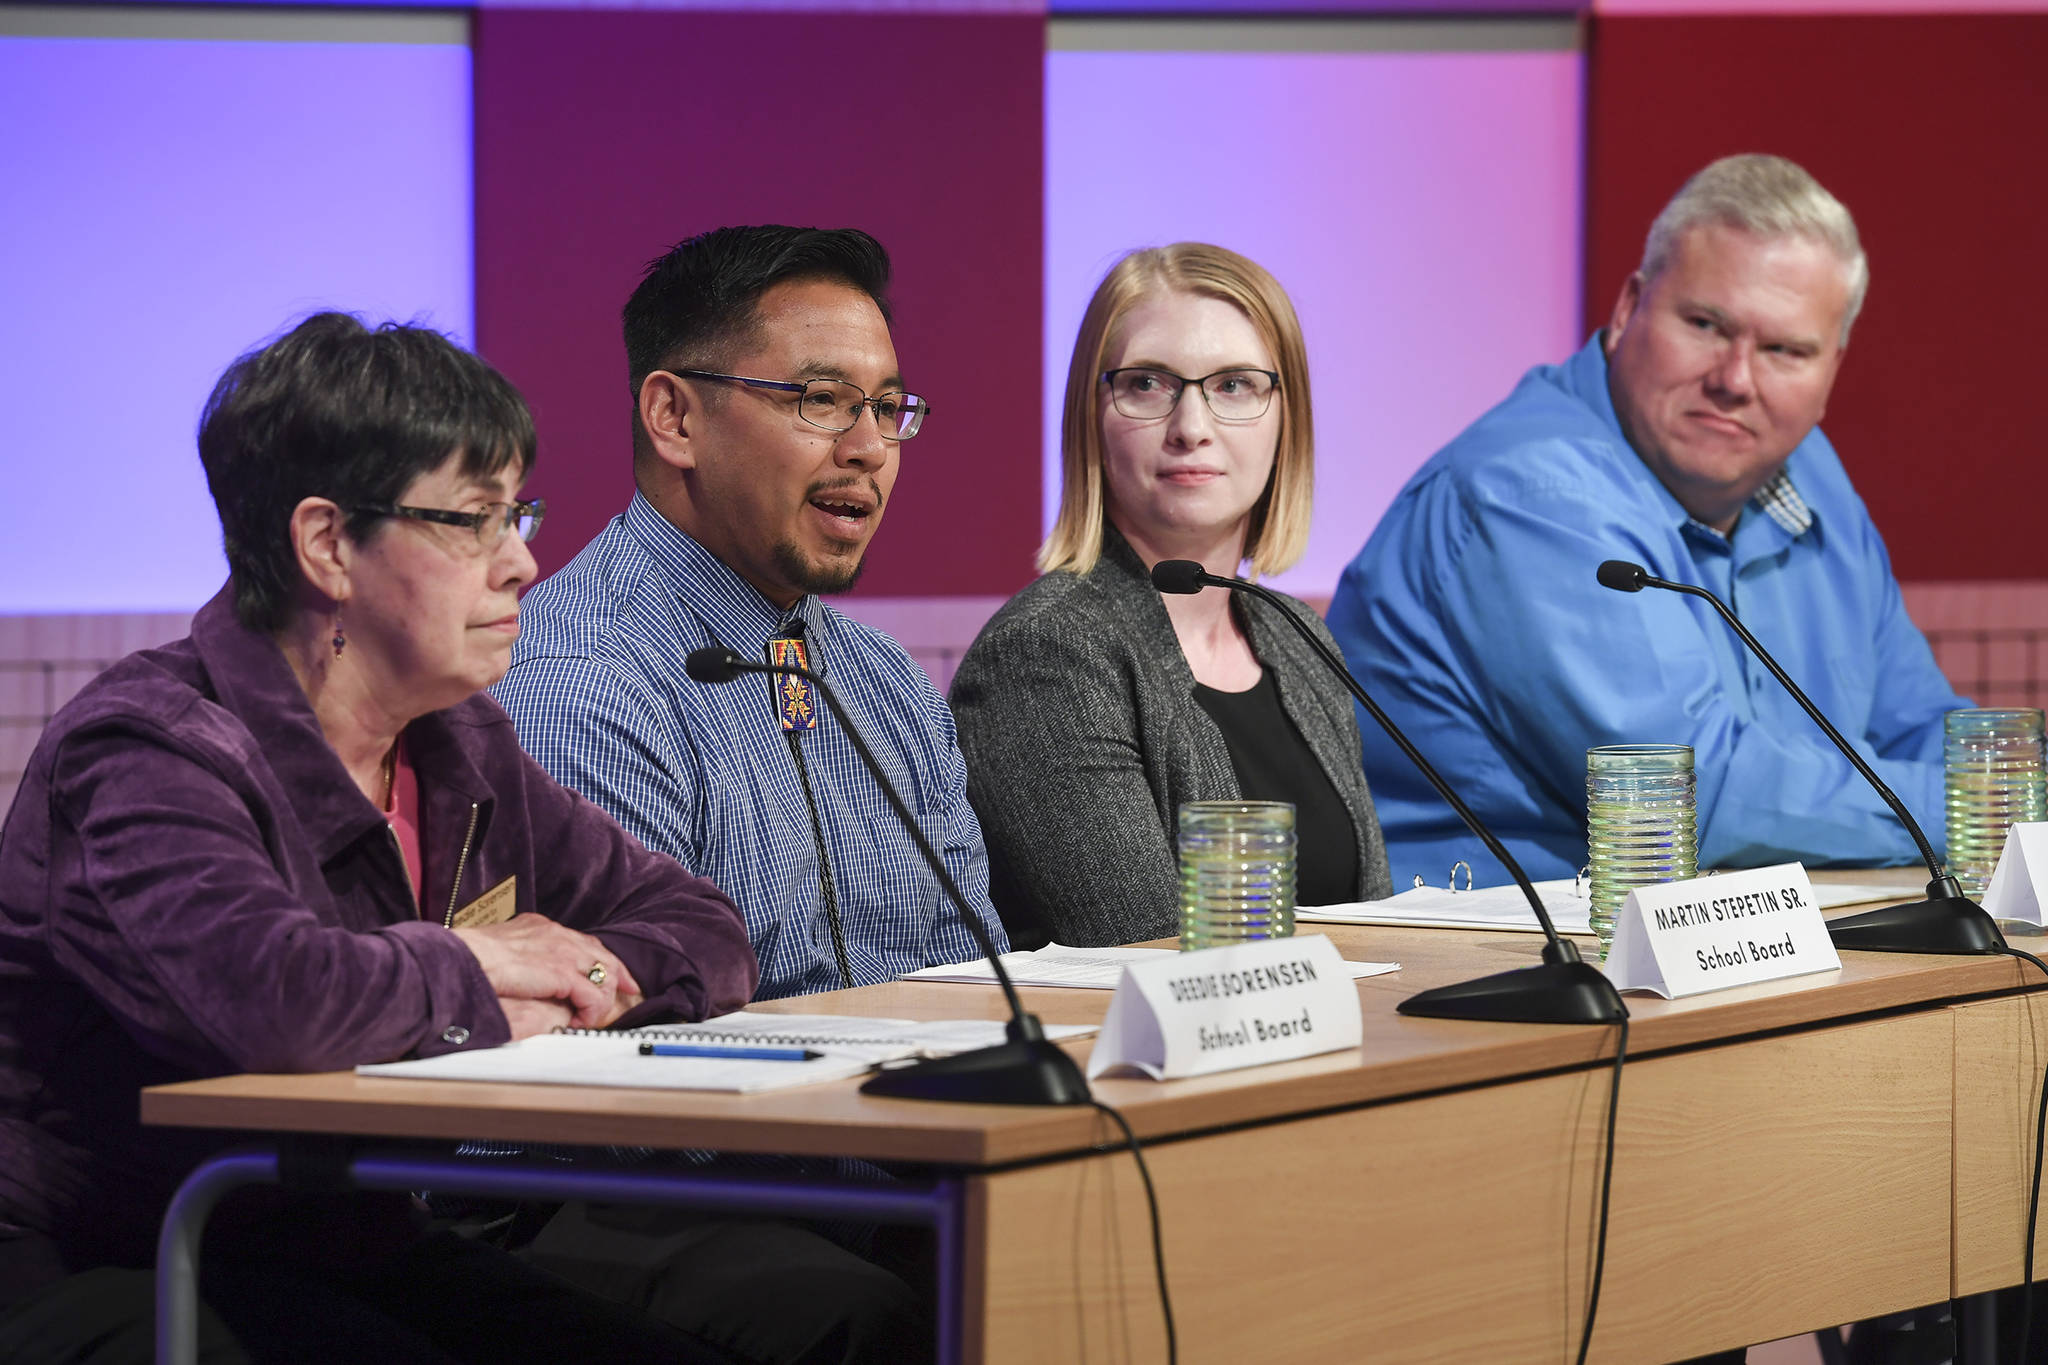 Juneau School Board candidates Deedie Sorensen, left, Martin Stepetin, Sr., Bonny Jensen and Emil Mackey, right, respond to questions during a candidate forum at KTOO on Tuesday, Sept. 17, 2019. The event was sponsored by the Juneau League of Women Voters. (Michael Penn | Juneau Empire)